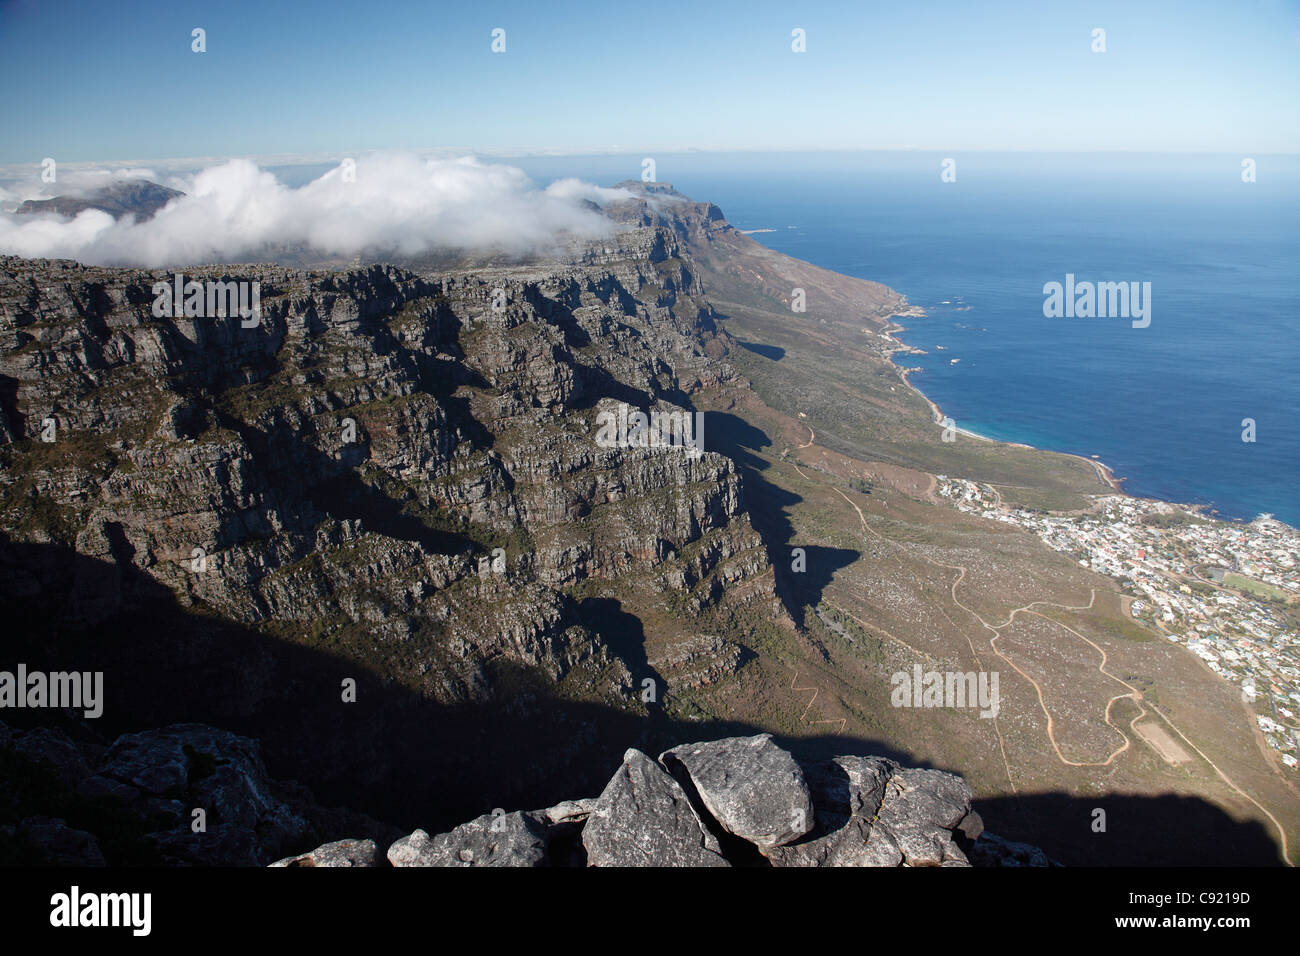 Clifton Bay from the top of Table Mountain. Stock Photo